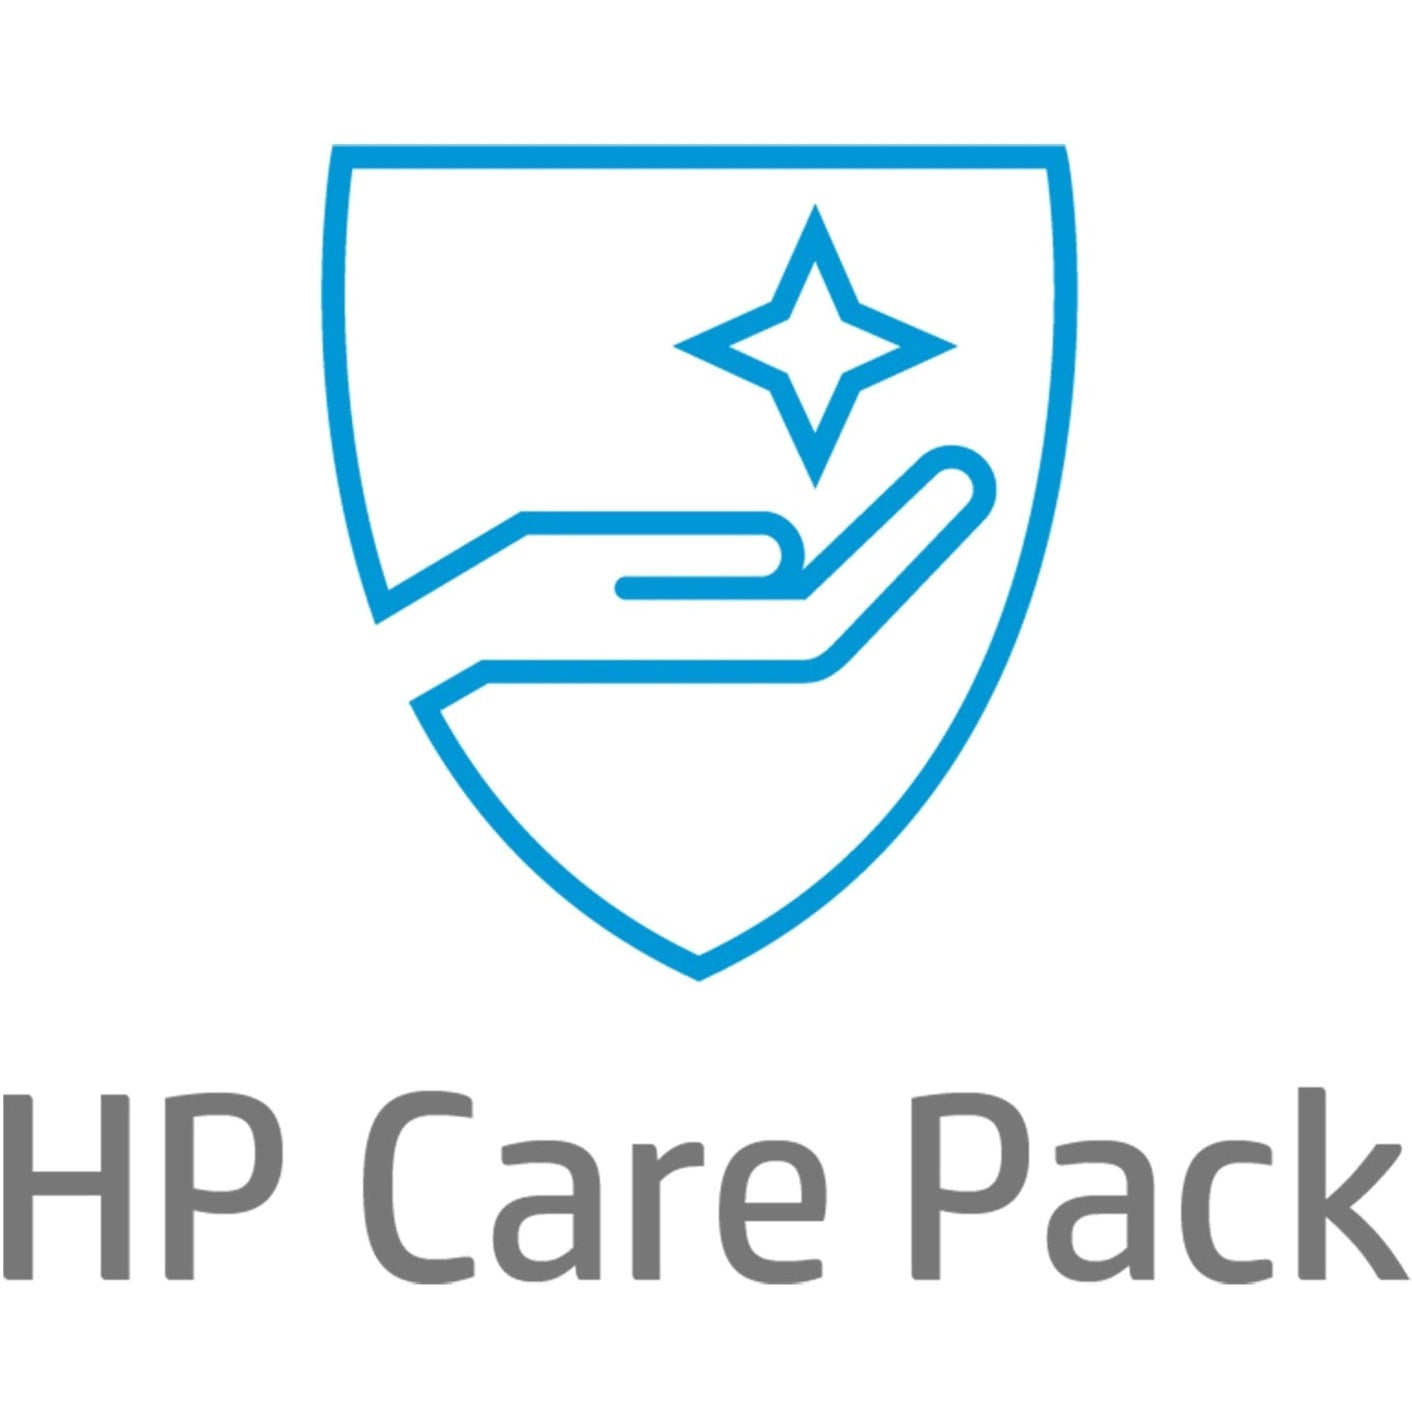 HP Care Pack - Extended Warranty - 3 Year - Service (UK707E)